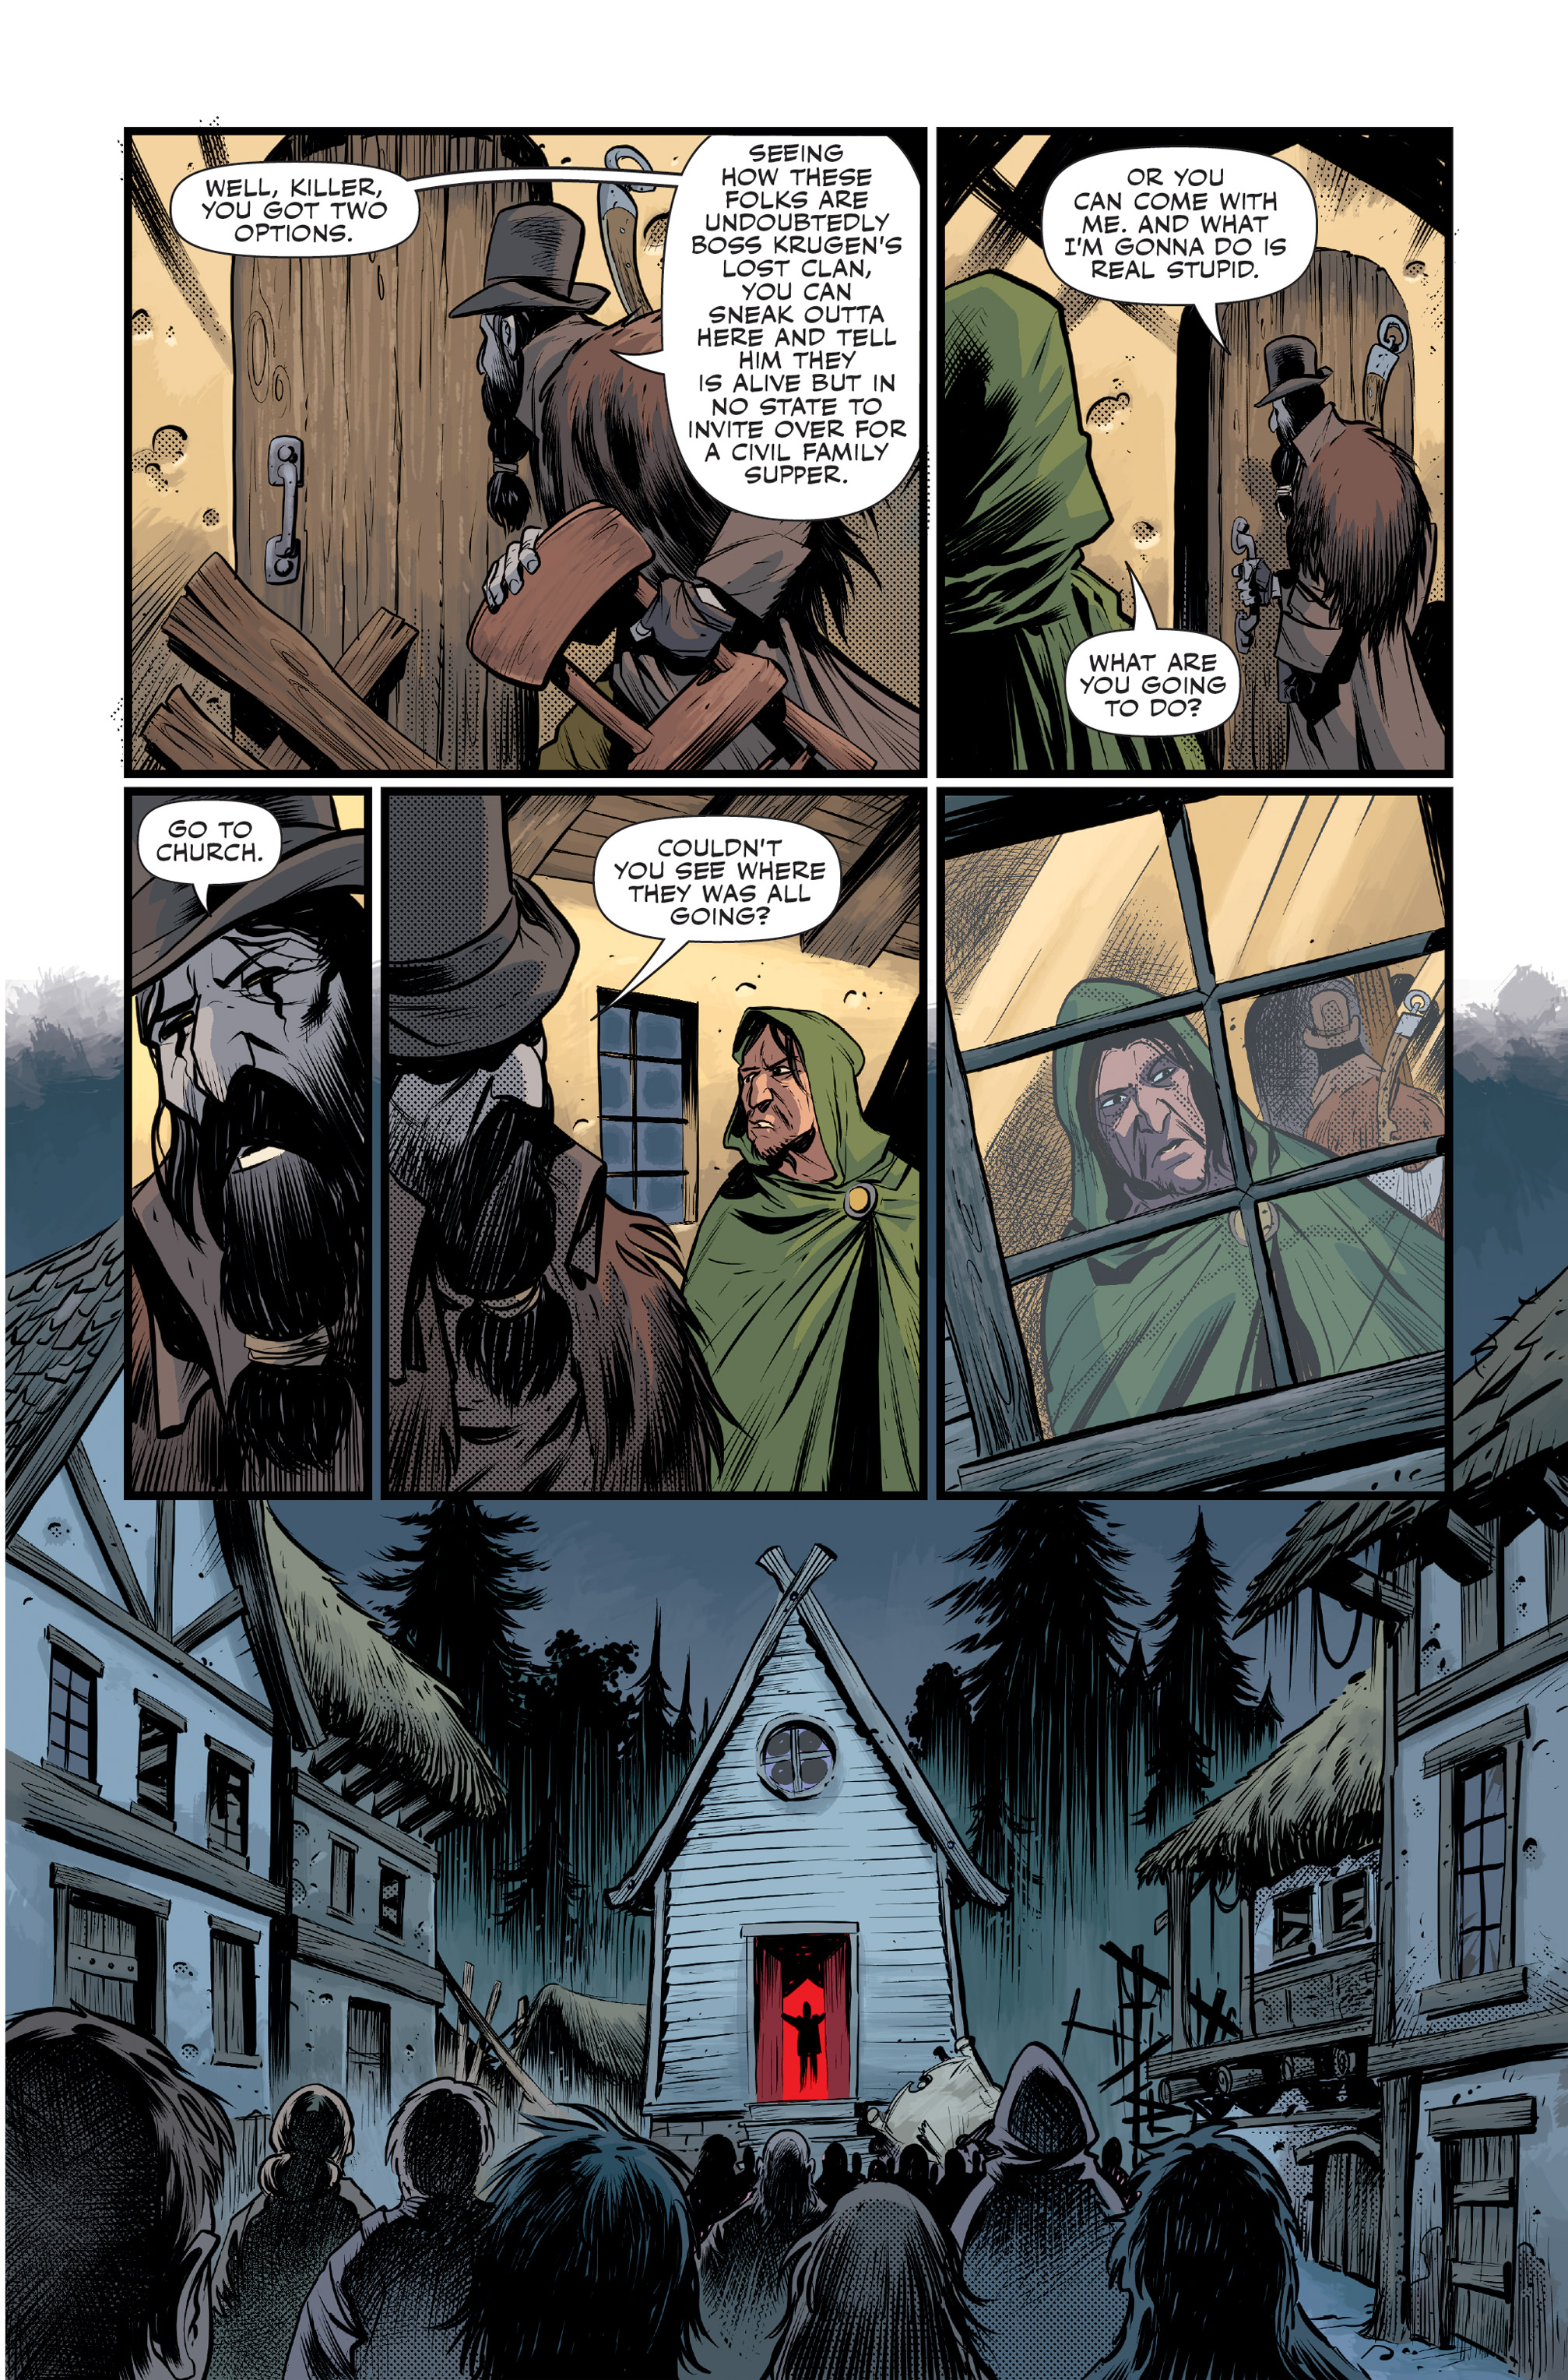 Hillbilly: Red-Eyed Witchery From Beyond (2018-): Chapter 3 - Page 5